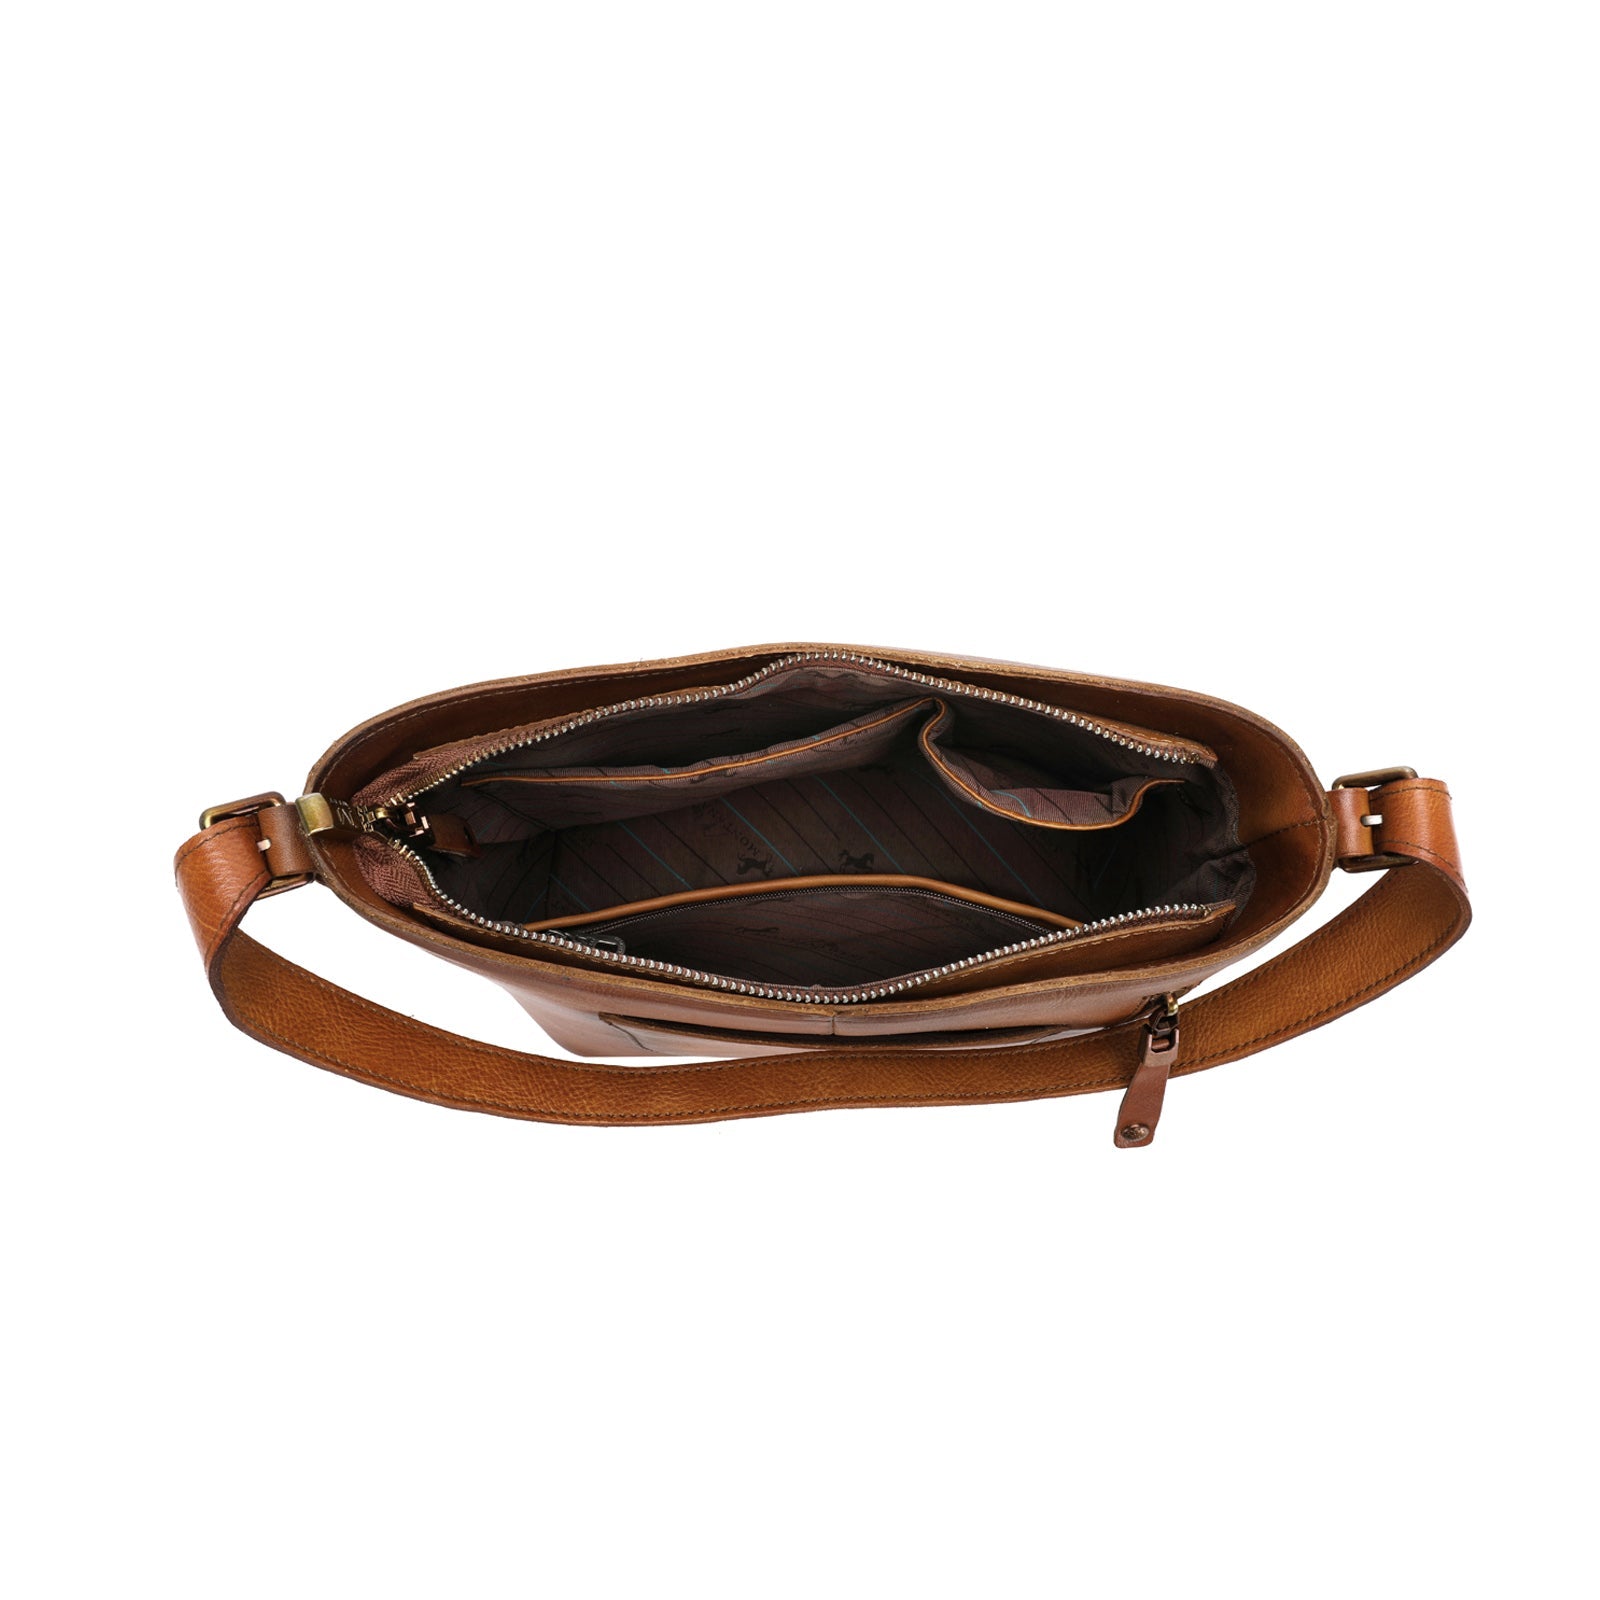 Montana West Genuine Leather Collection Concealed Carry Hobo - Cowgirl Wear